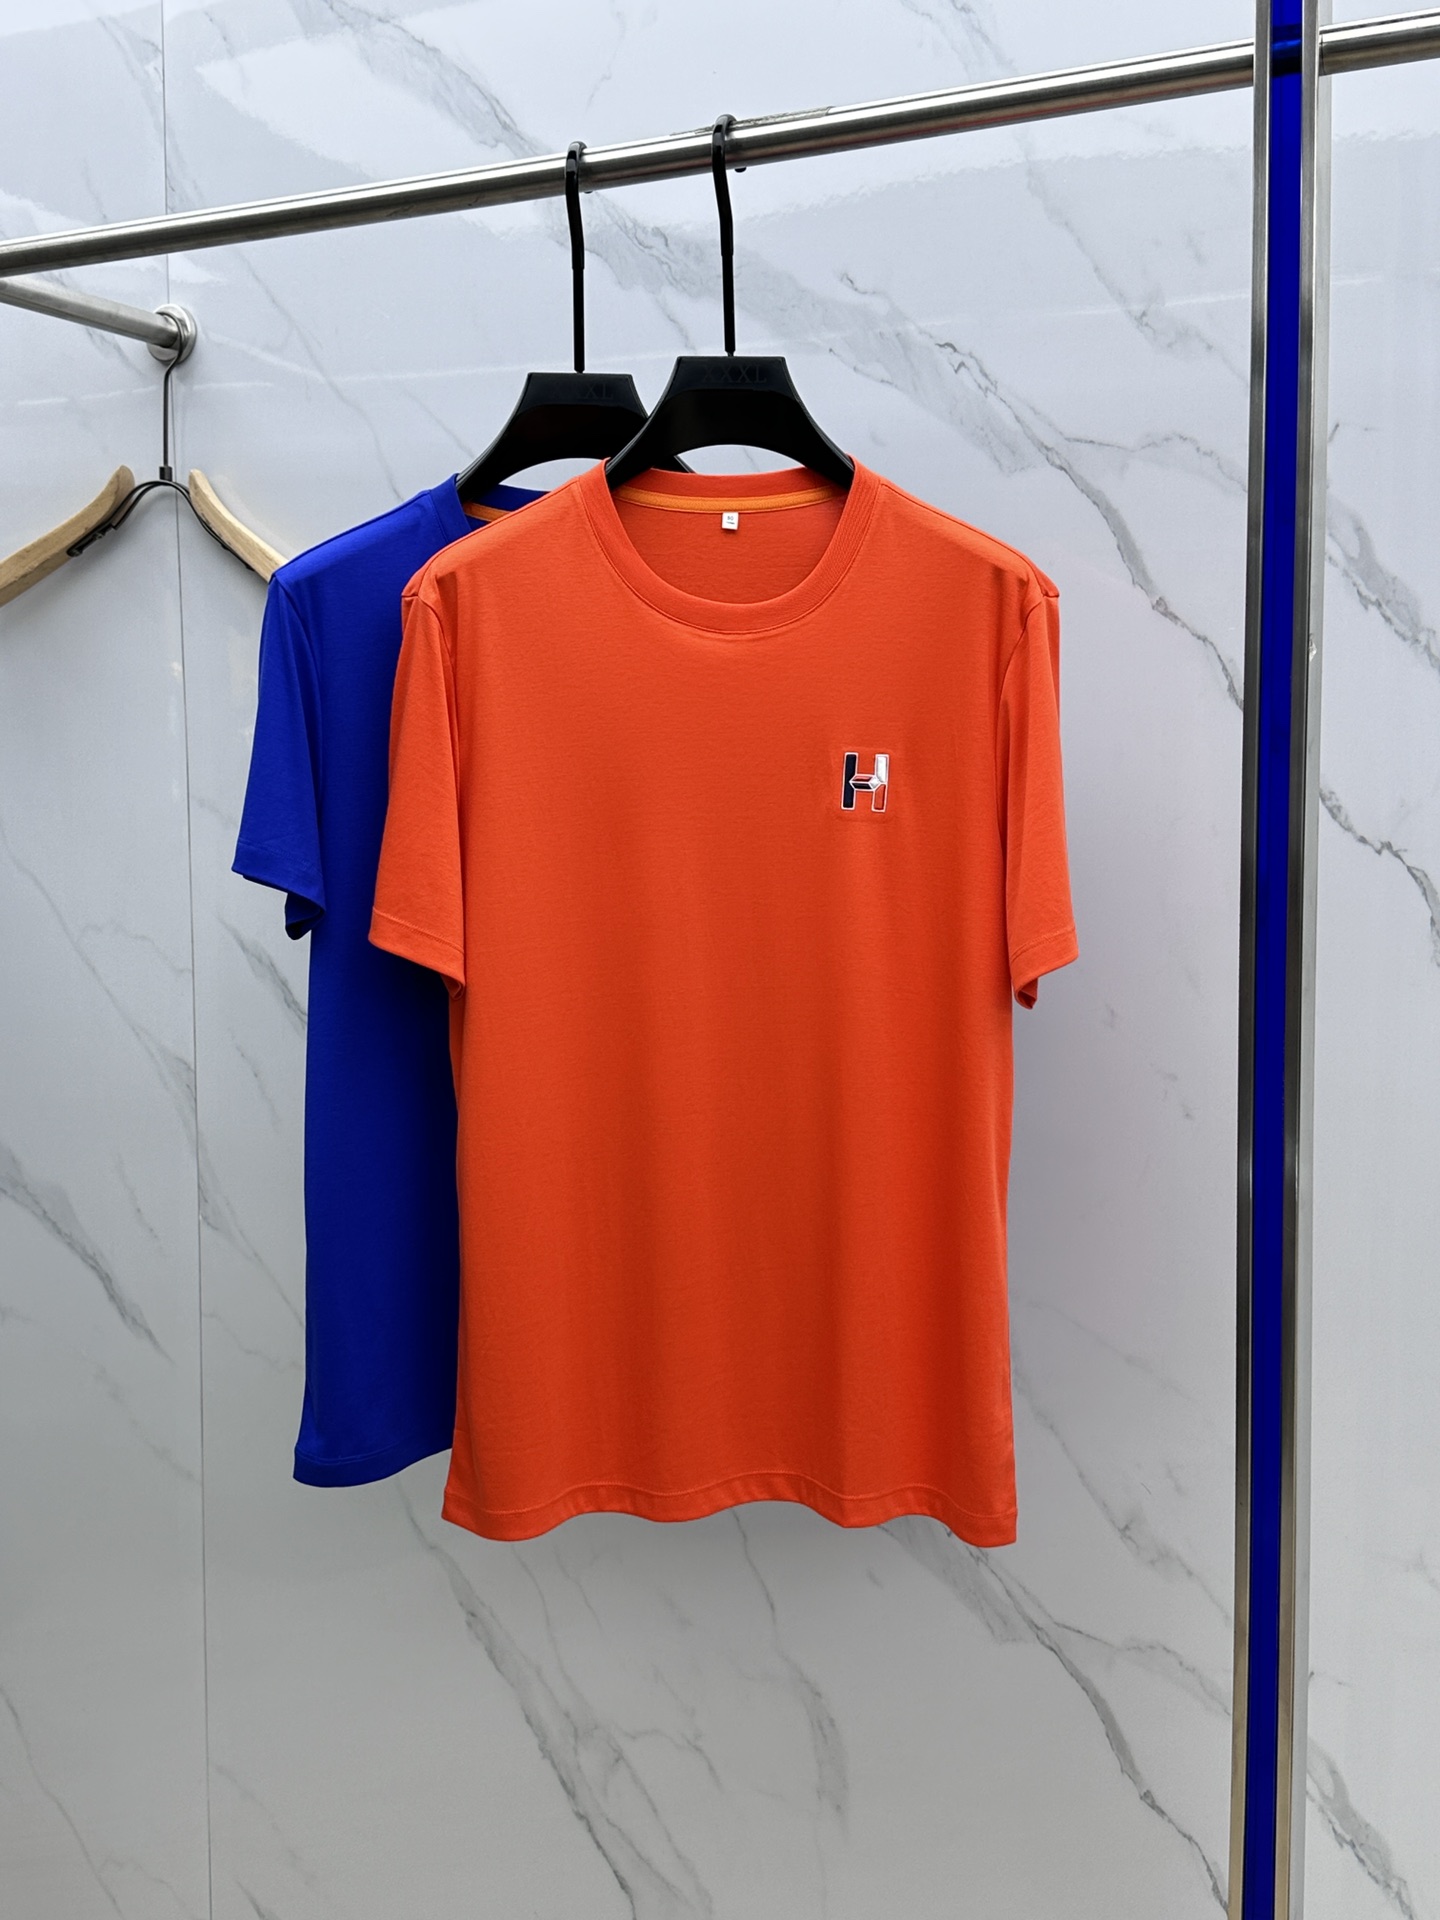 Hermes Clothing T-Shirt Customize The Best Replica
 Printing Cotton Mercerized Short Sleeve